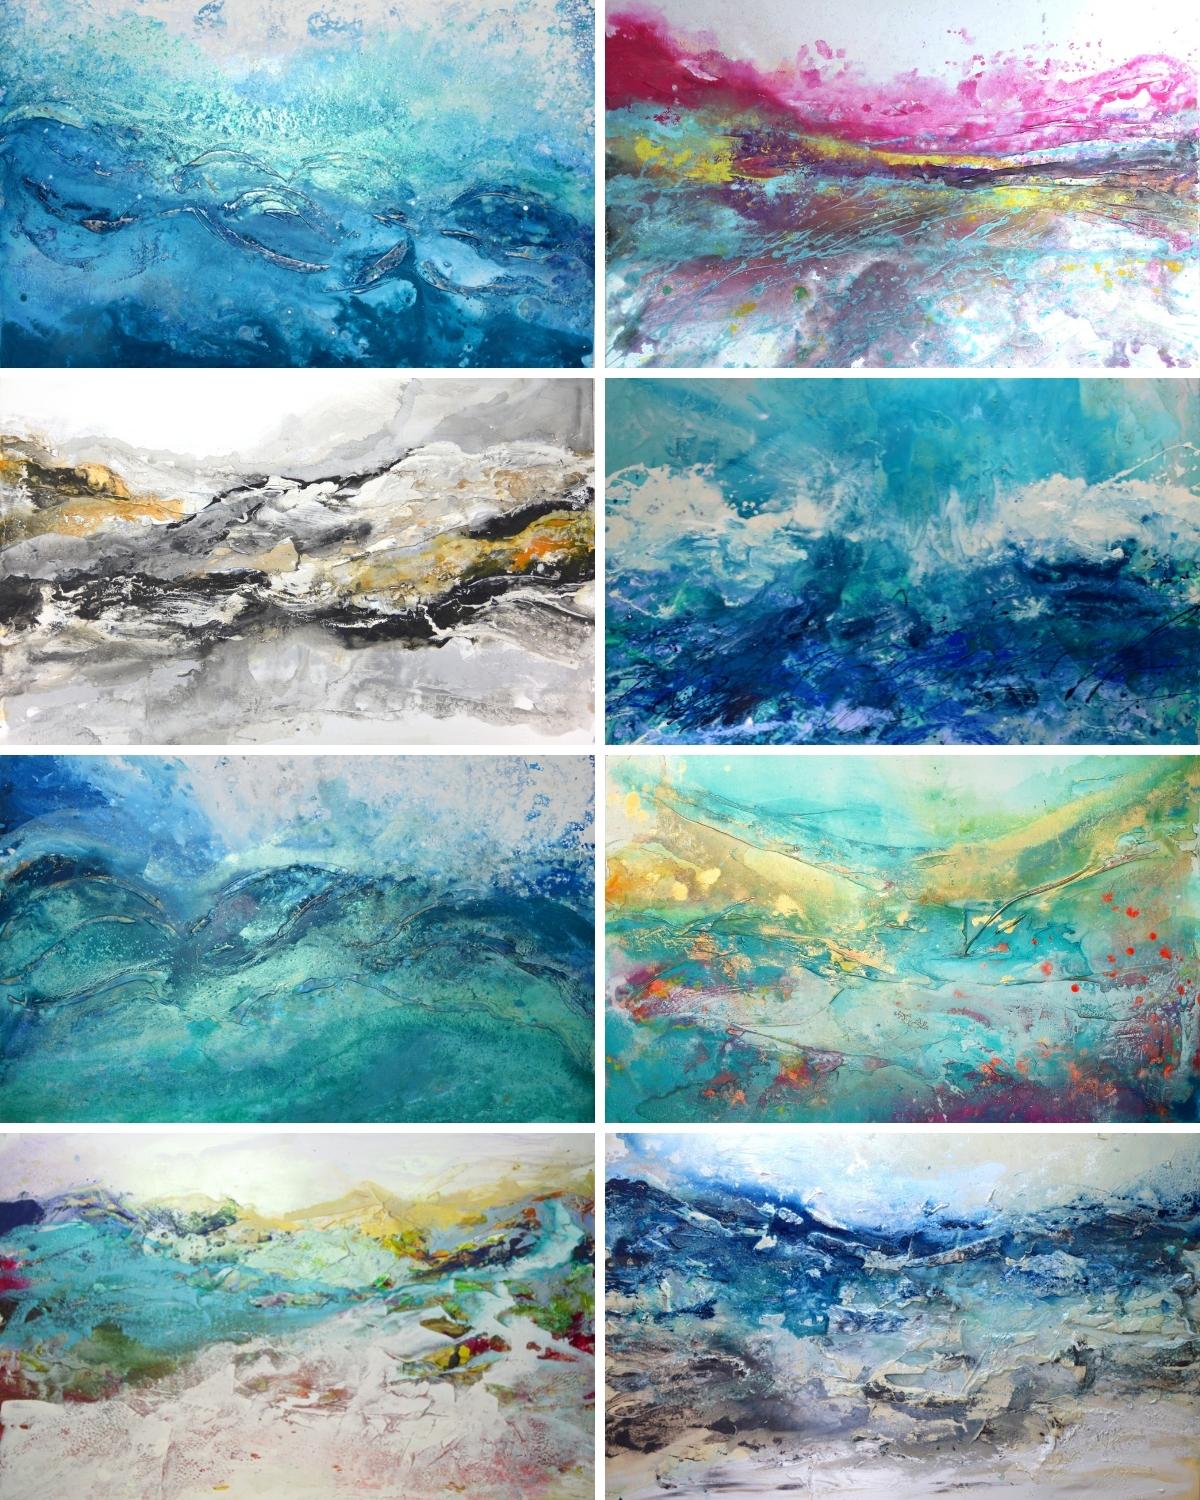 SIGNED PRINT OFFER: Buy 1 Get 3 Free - Landscapes and Seascapes